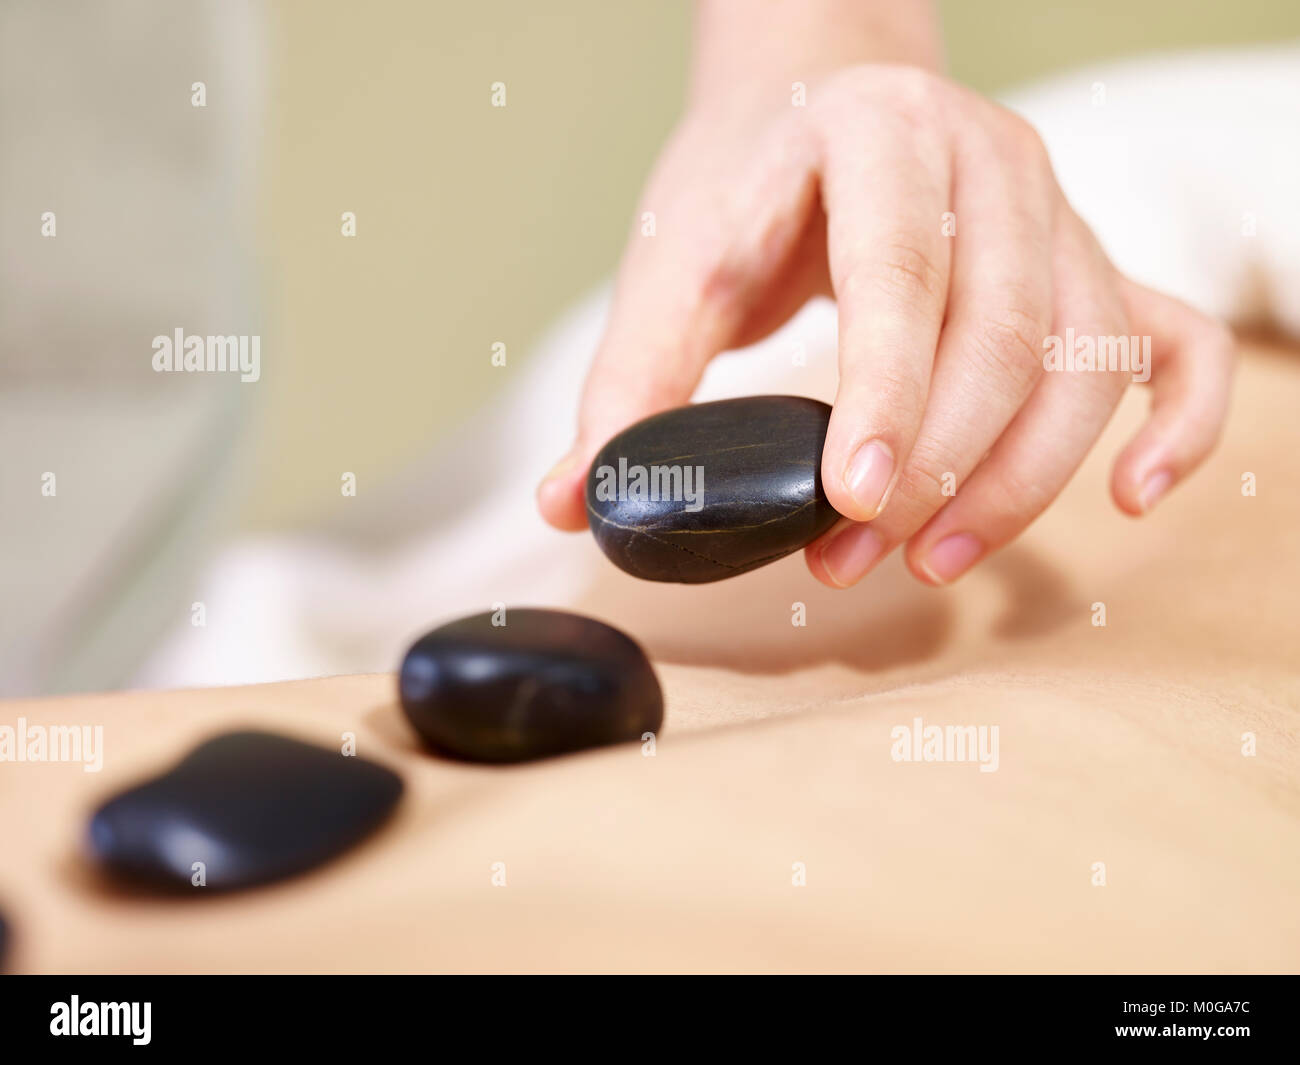 close-up of hand of a masseur placing stone on back of customer to perform hot stone massage. Stock Photo